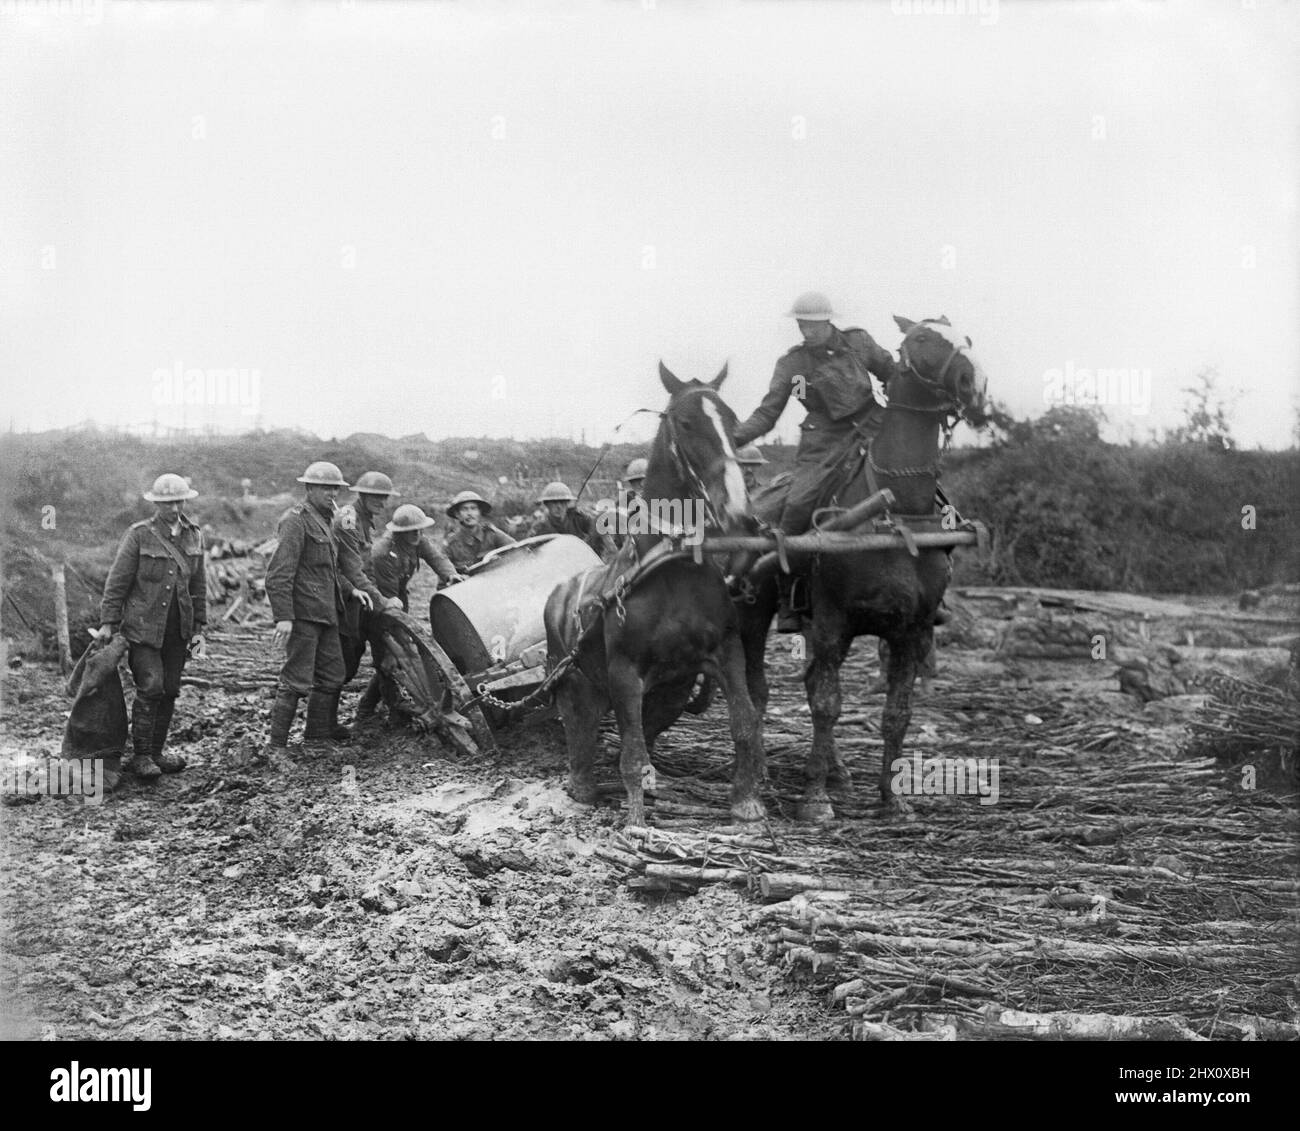 British soldiers try to rescue a horse-drawn water cart, which has become stuck in mud up to the axle at St. Eloi, 11 August 1917. One wheel and the back leg of one of the horses has become stuck after coming off the edge of the brushwood track. Stock Photo